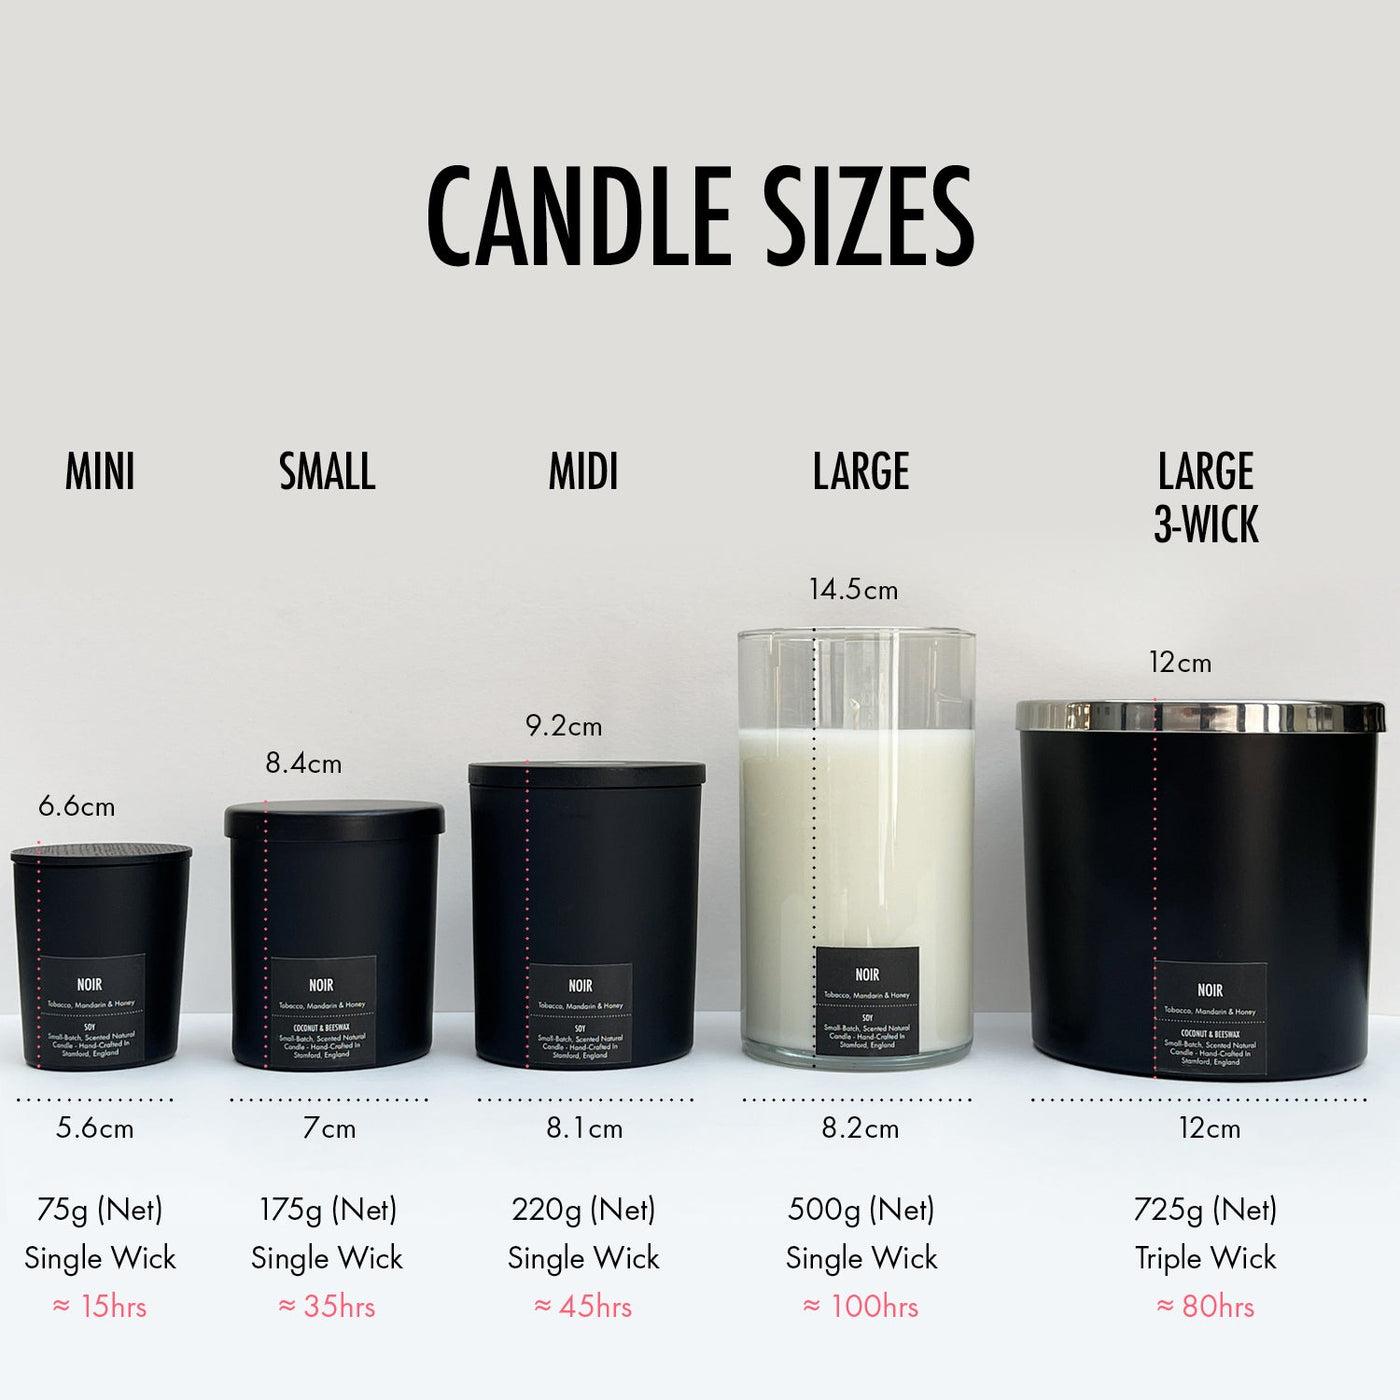 Vanille - Scented Soy Candle